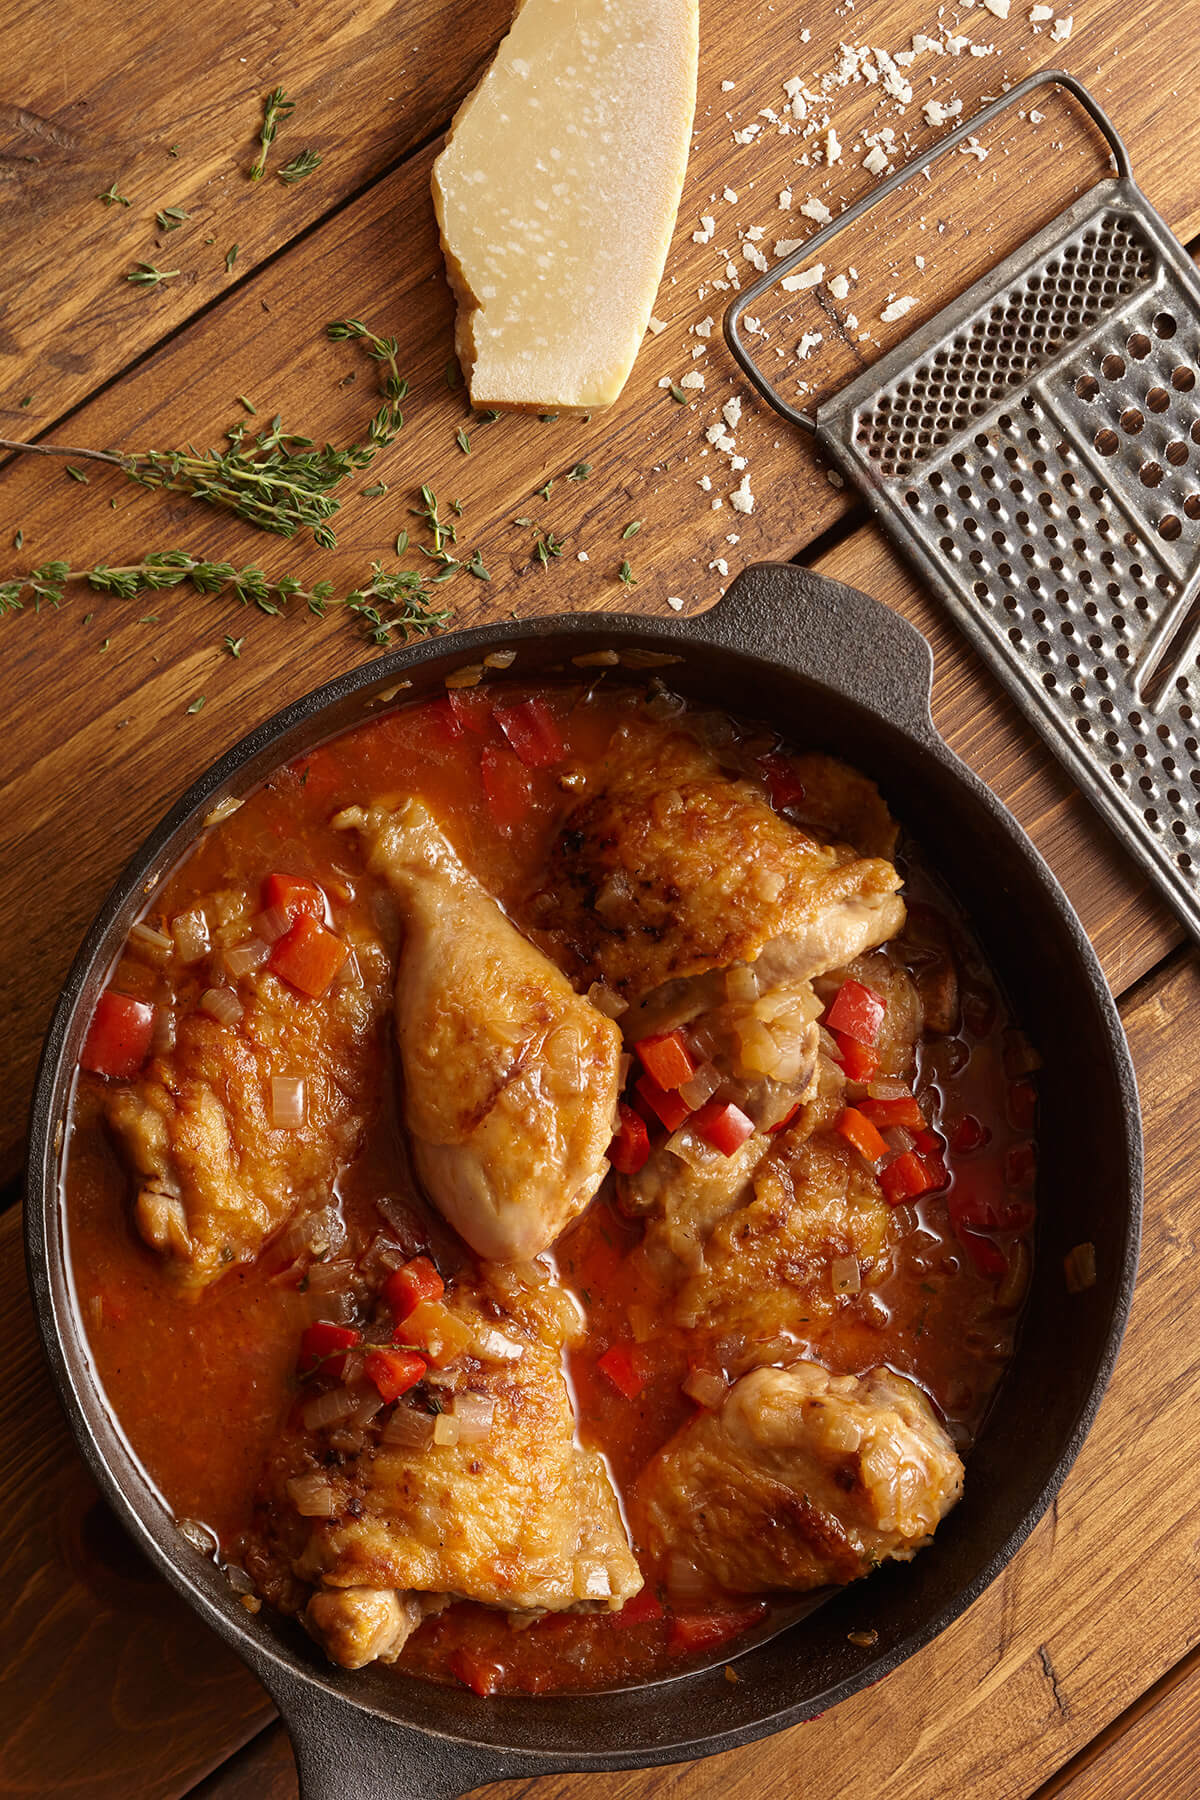 Wine-Braised Chicken with Peppers and Herbs